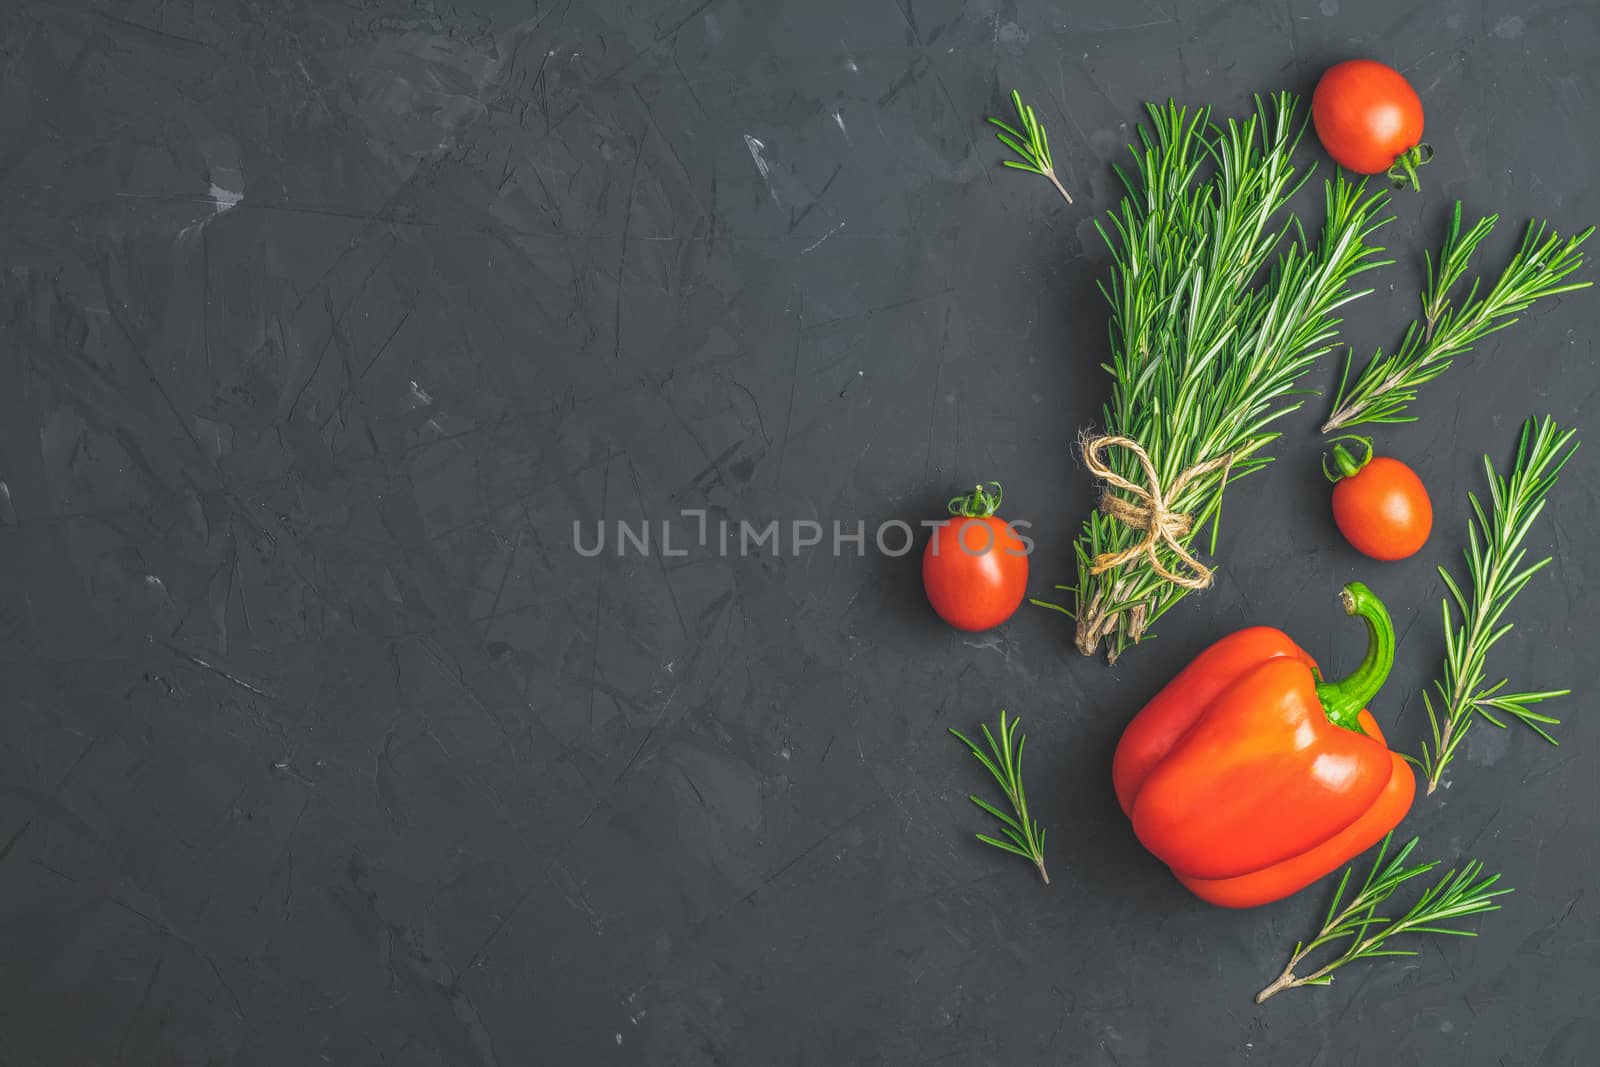 Rosemary bunch of bouquets, raw pepper and tomatoes on black sto by ArtSvitlyna